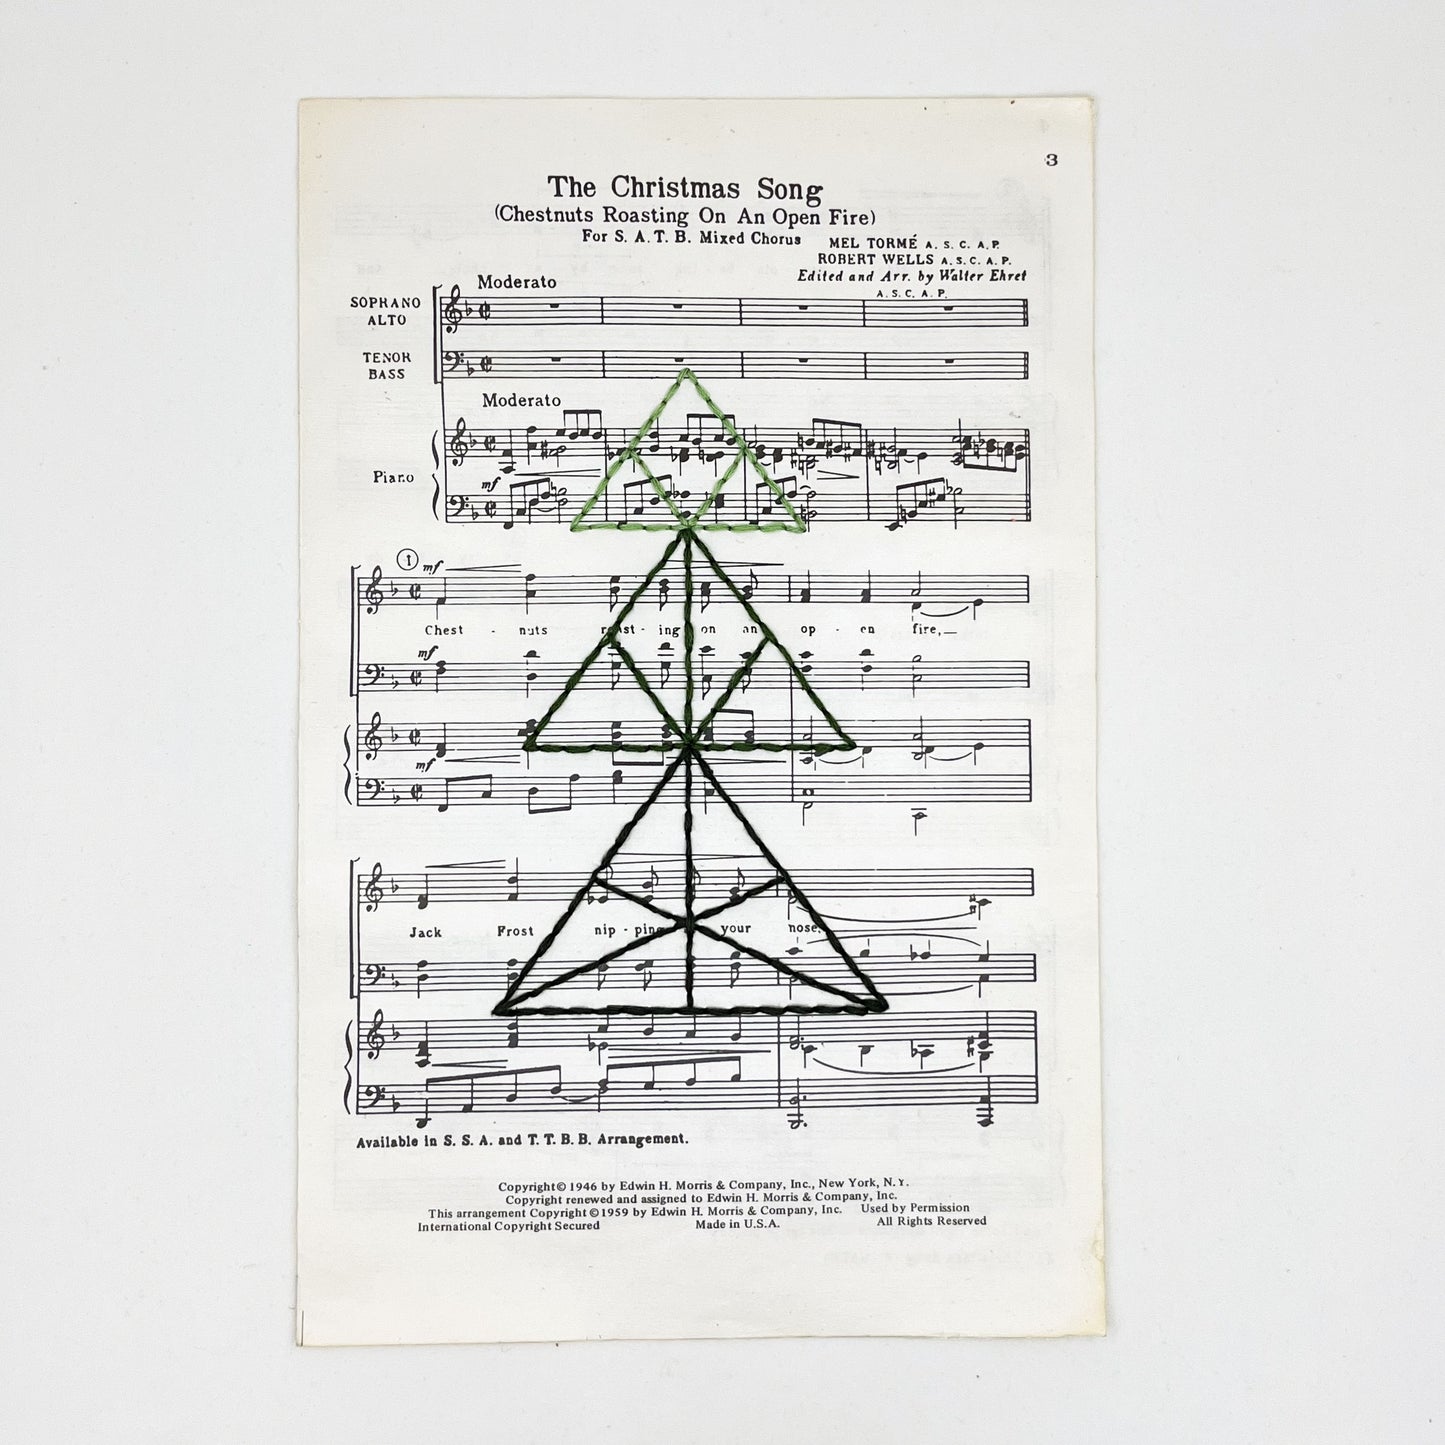 sheet music from "The Christmas Song", hand stitched over with a Christmas tree made from triangles, in shades of green thread